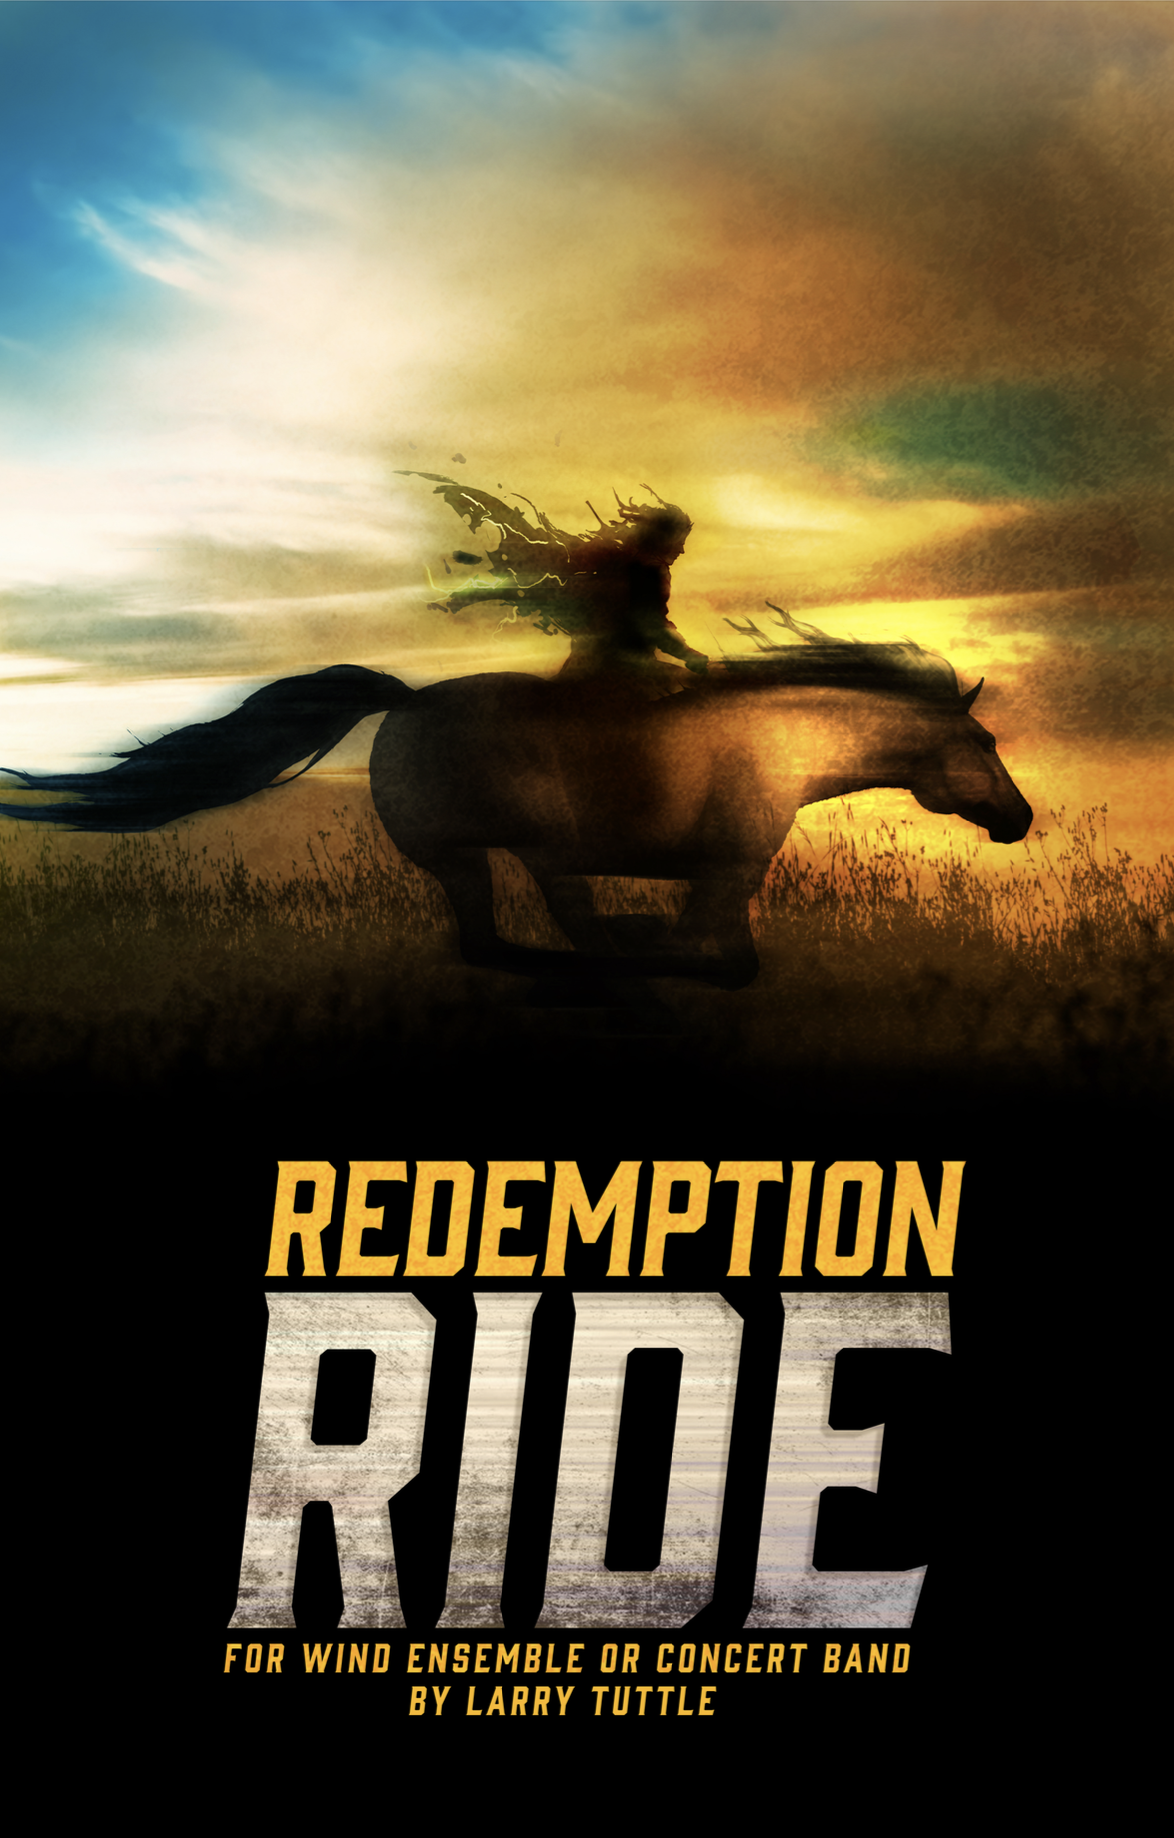 Redemption Ride by Larry Tuttle